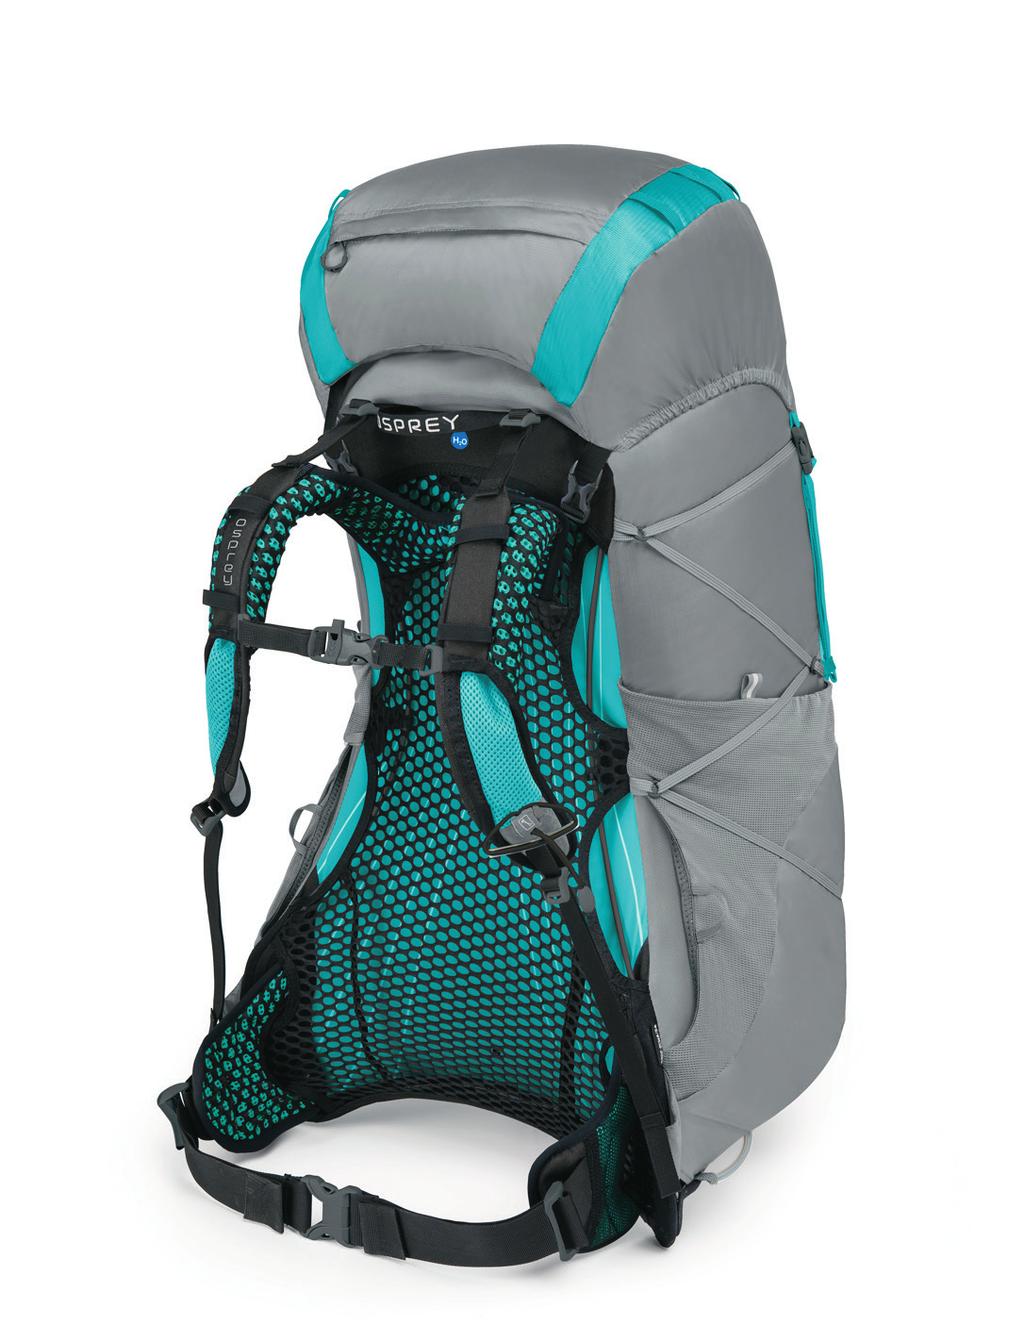 CARRY 1 ULTRALIGHT AIRSPEED SUSPENSION + 6065 aluminum frame + 3D-tensioned breathable mesh backpanel with side ventilation 2 EXOFORM HARNESS + Seamless layered mesh provides improved comfort and